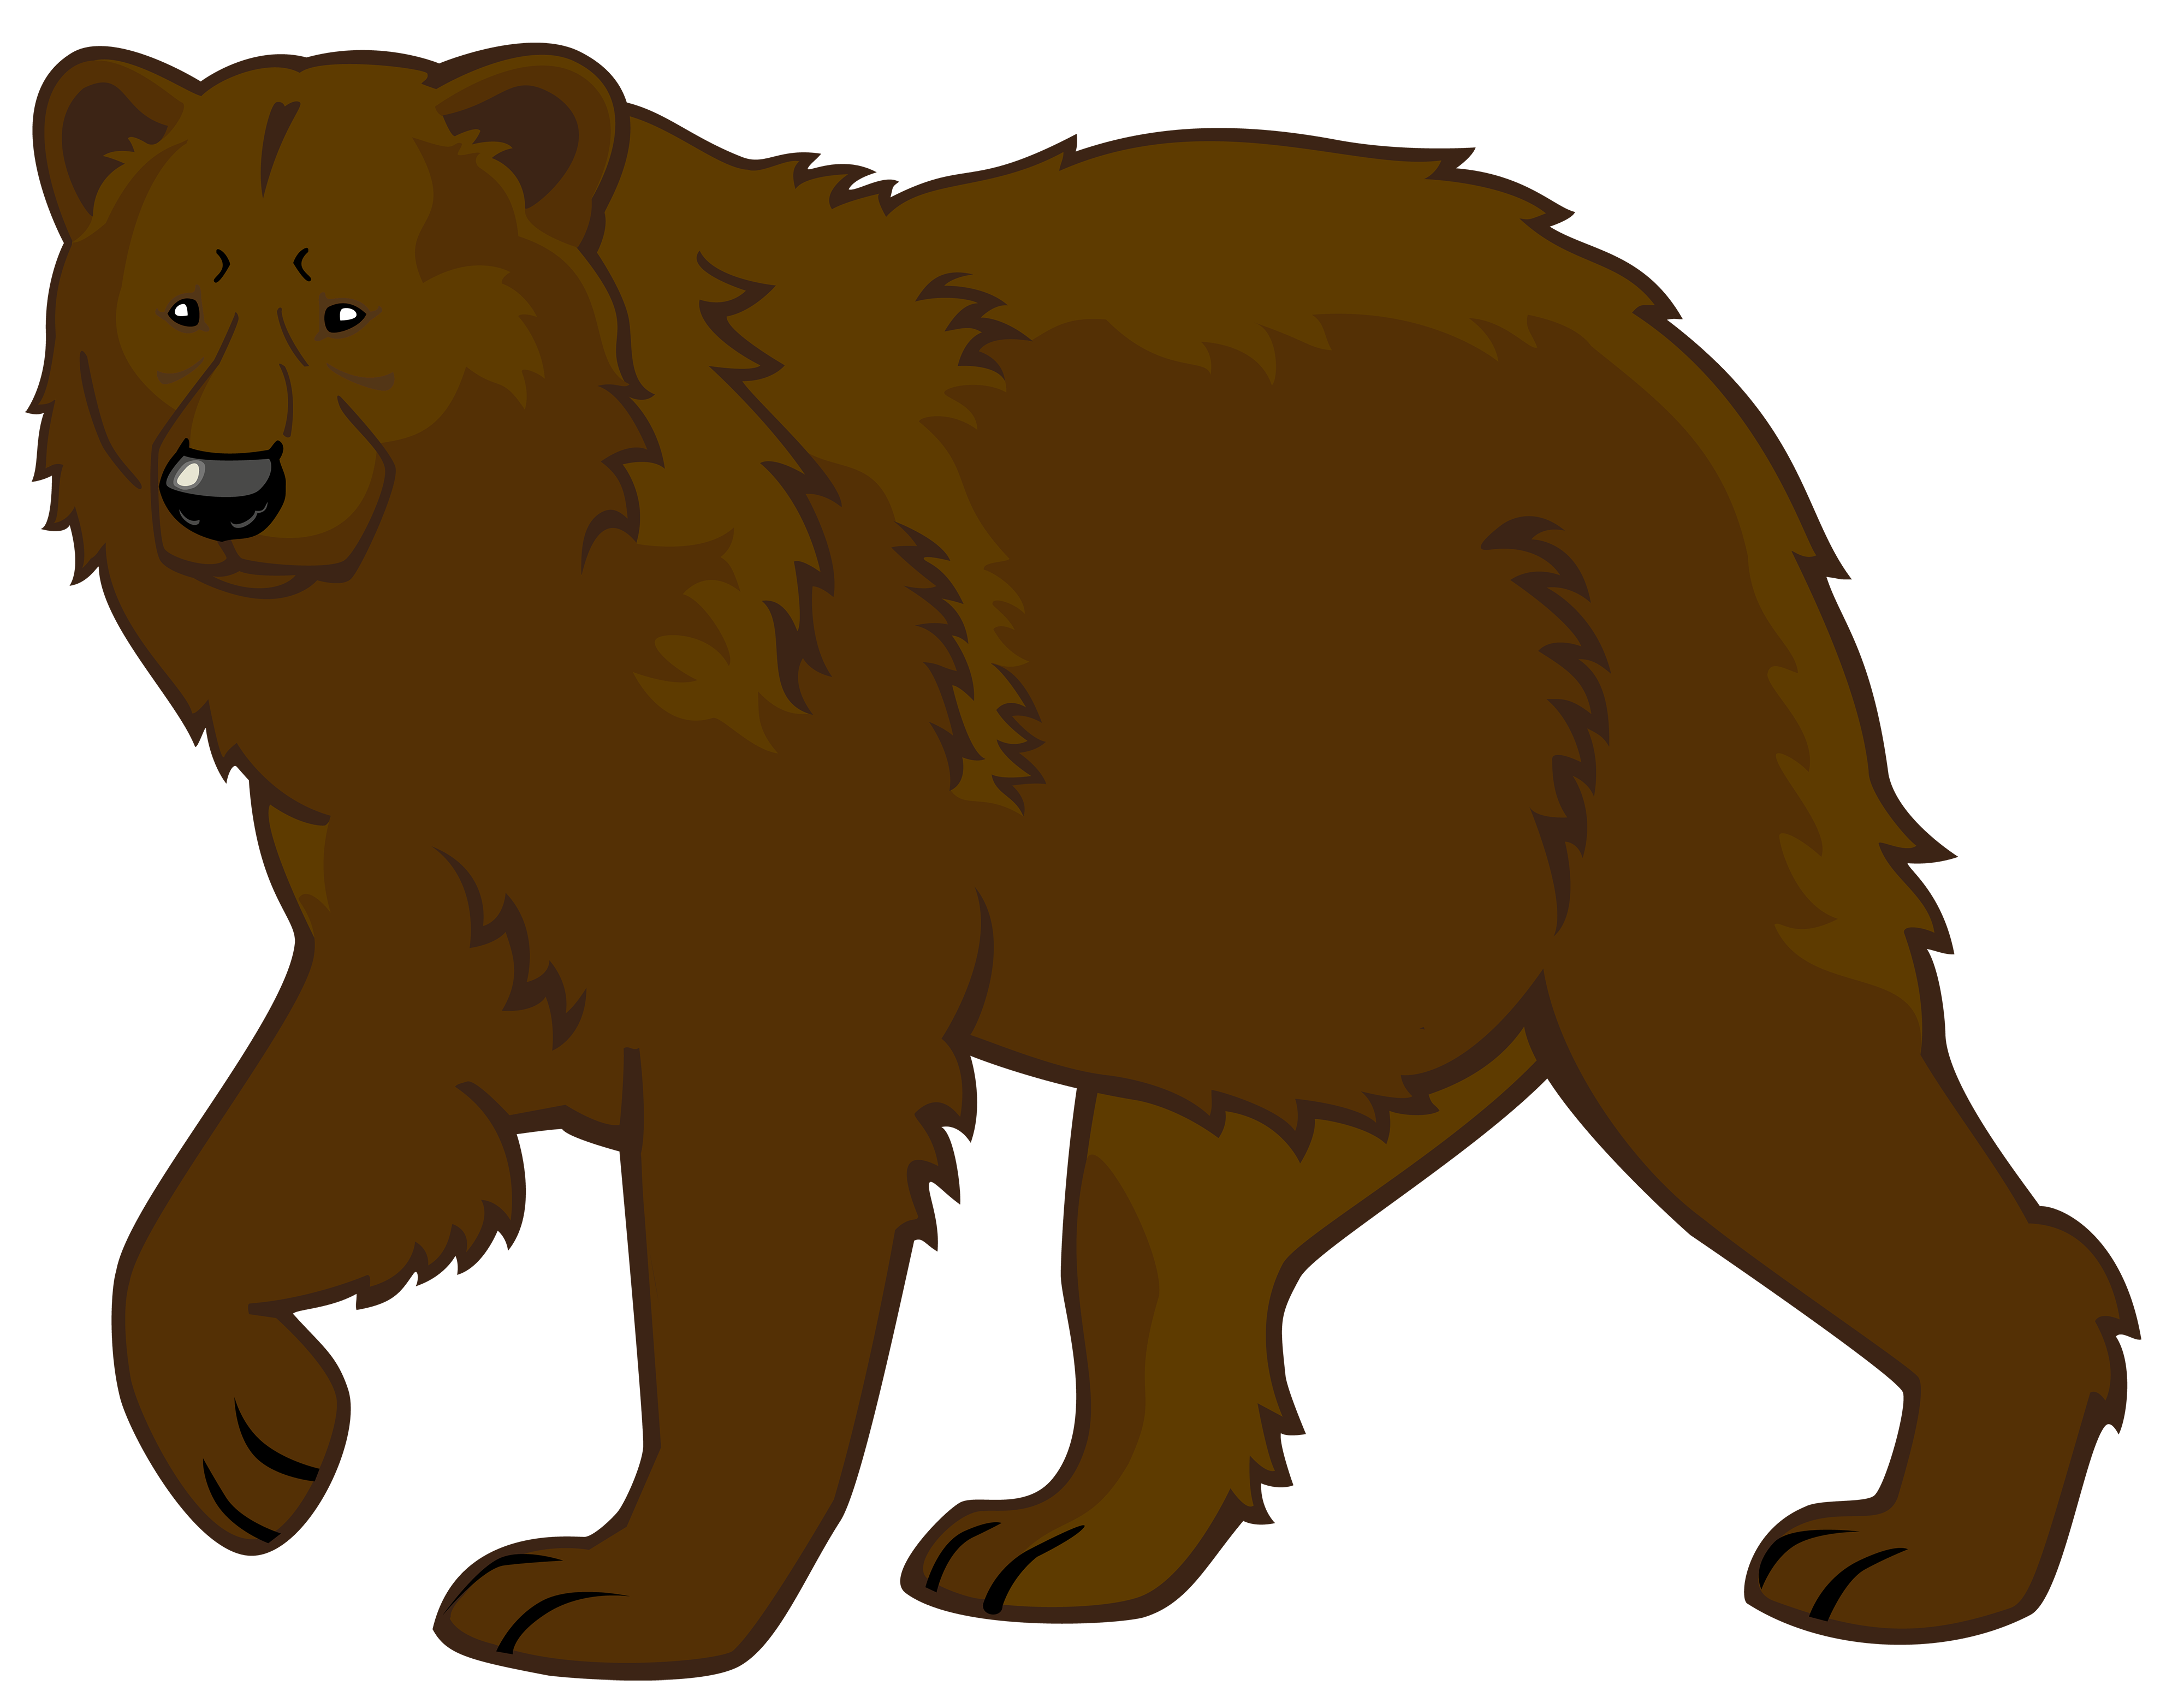 Free PNG Of Bears - 165168